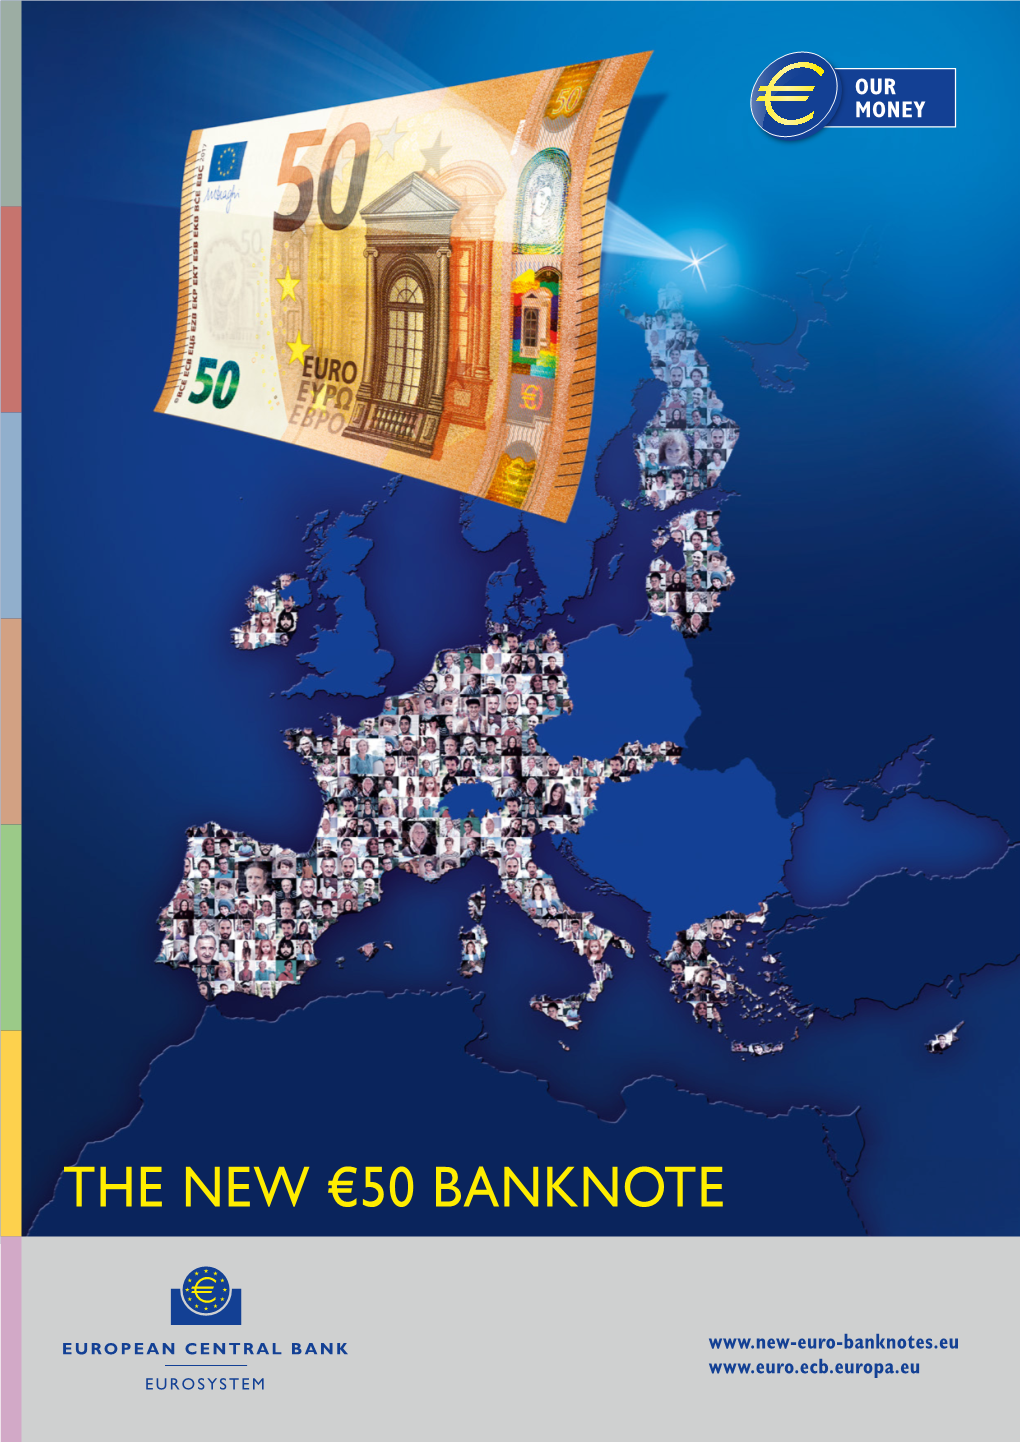 The New €50 Banknote